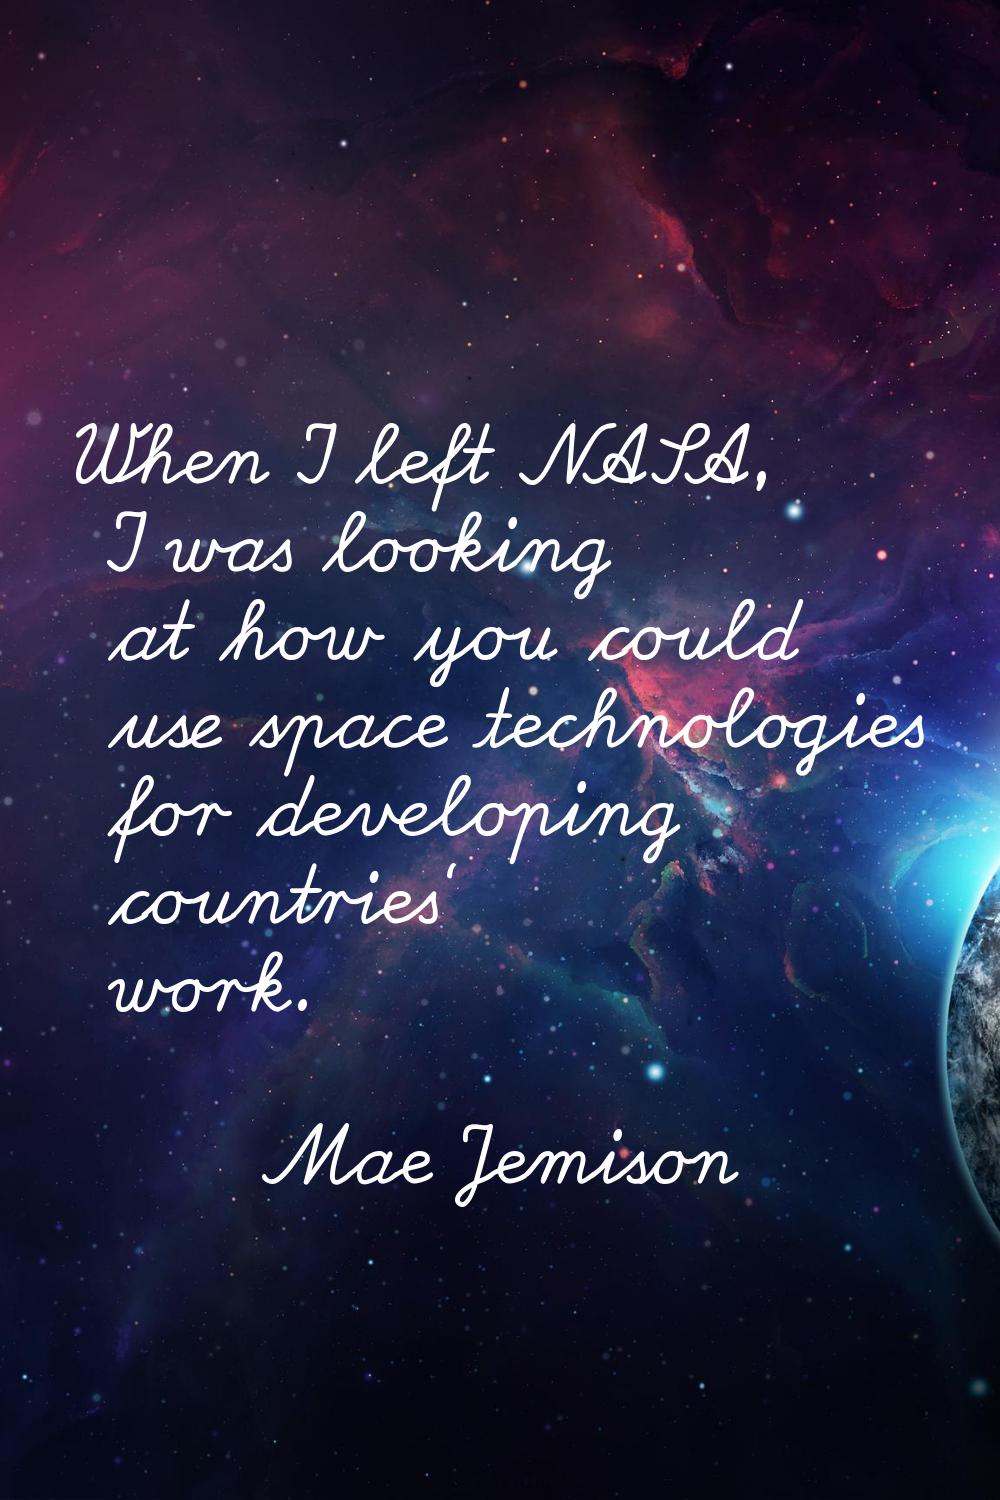 When I left NASA, I was looking at how you could use space technologies for developing countries' w